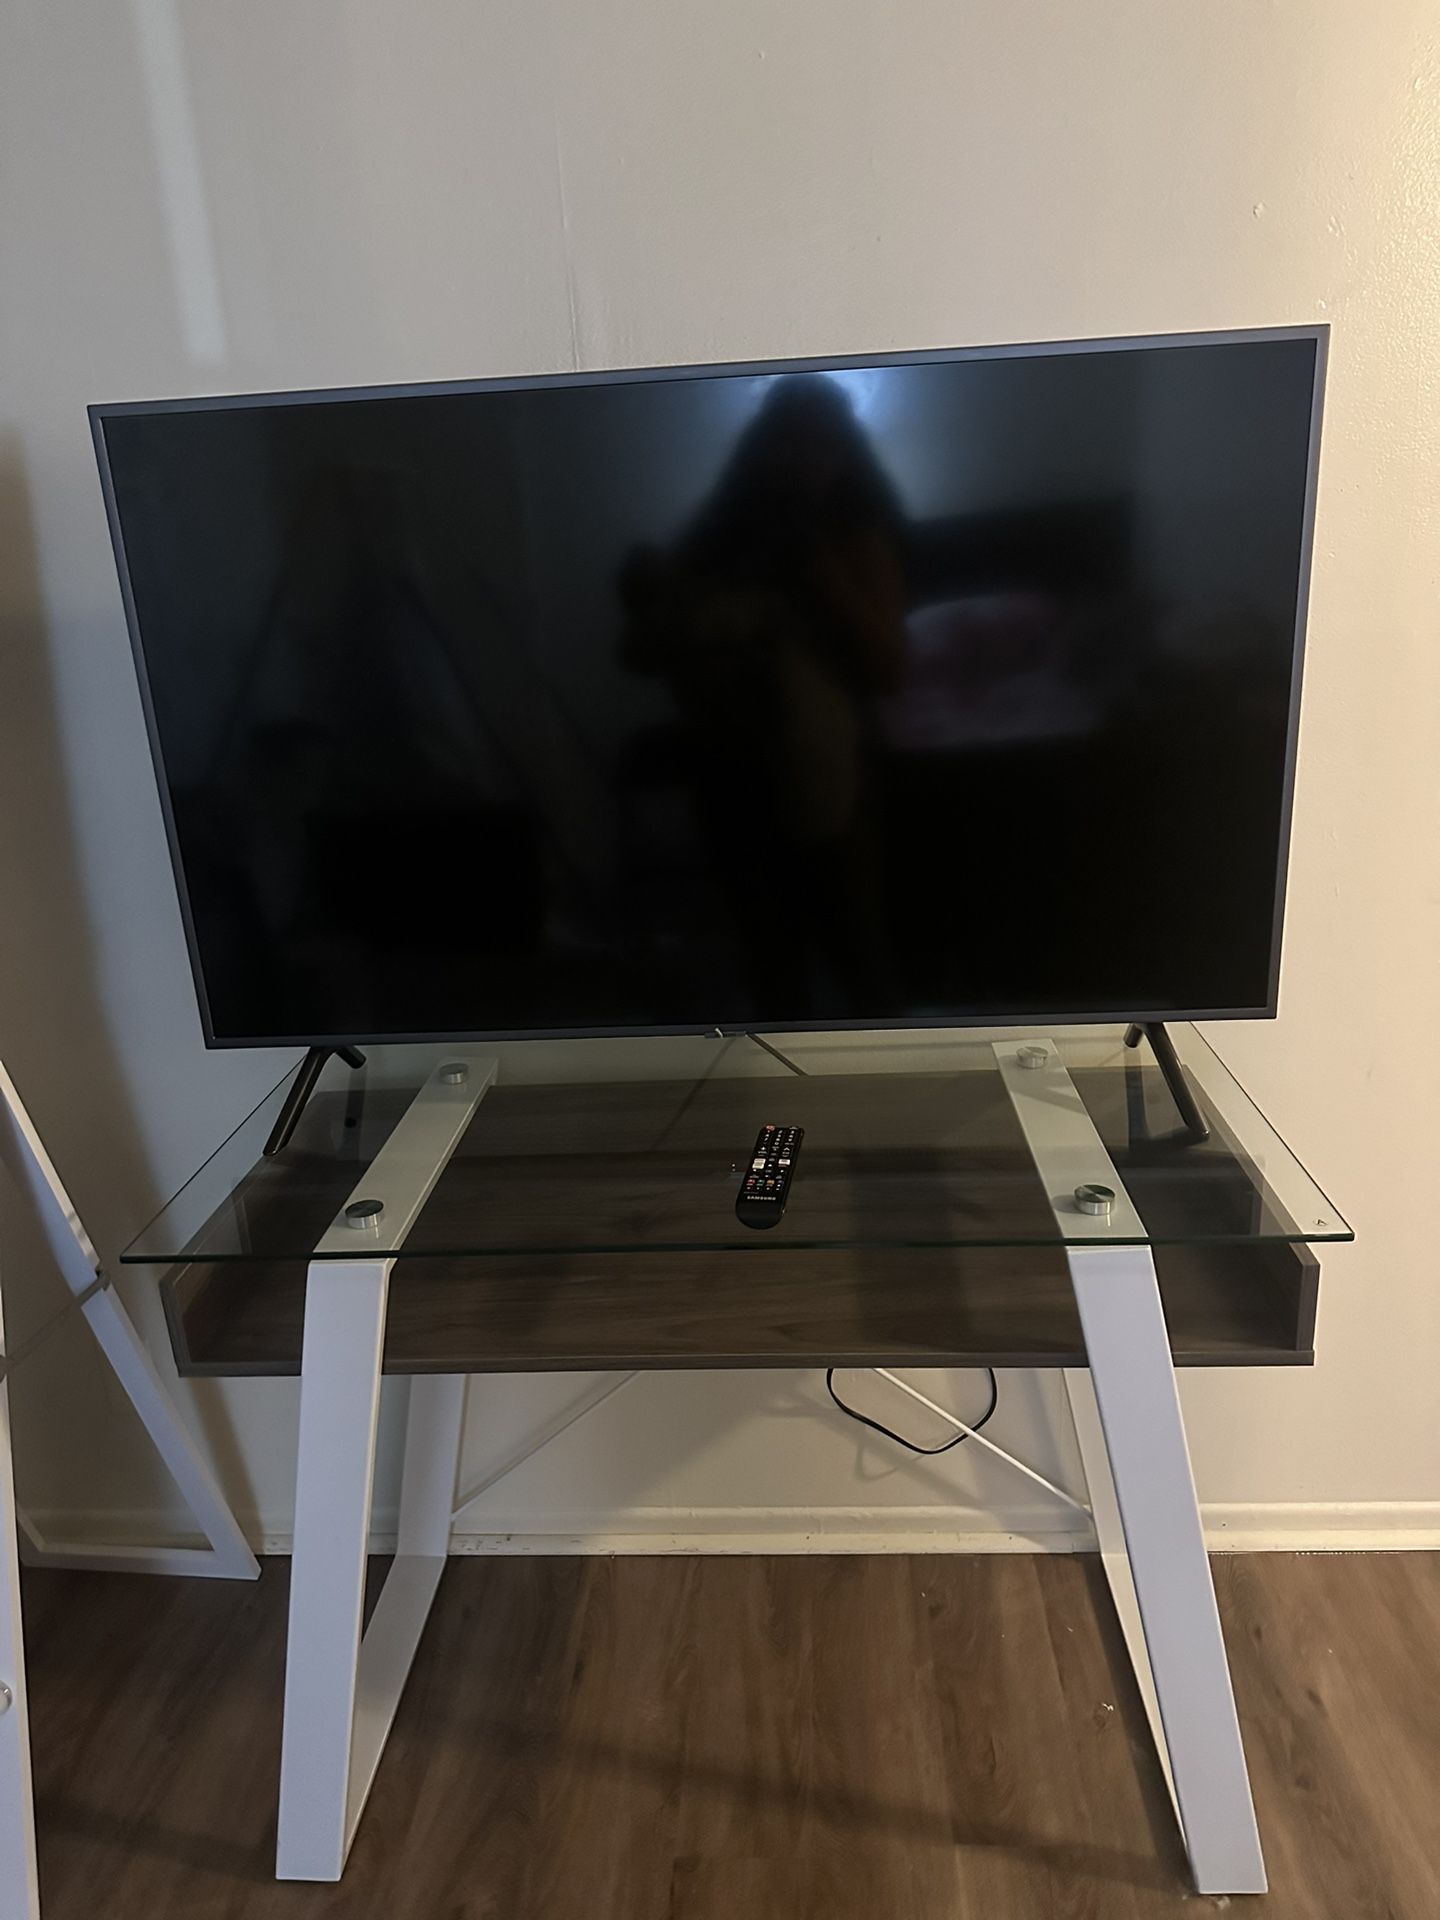  Tv Smart Samsung 50 inch And Stand 